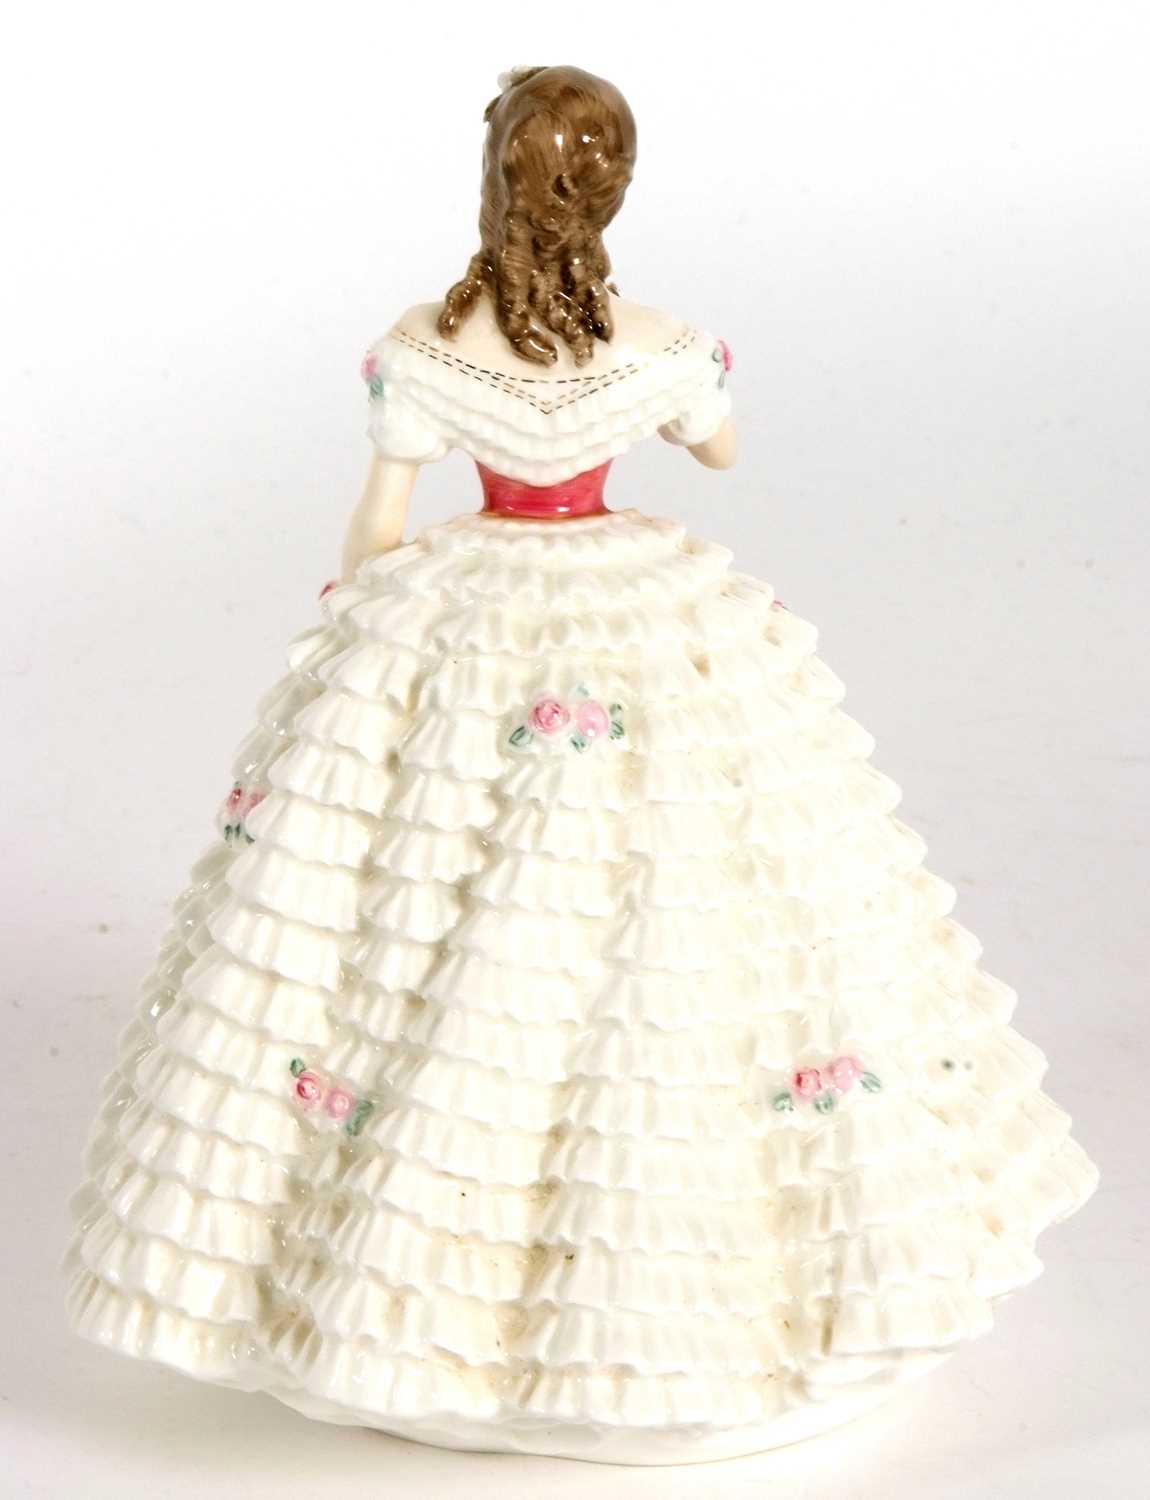 A Royal Doulton figure entitled "My True Love" from the "Language of Love" collection designed by - Image 3 of 5